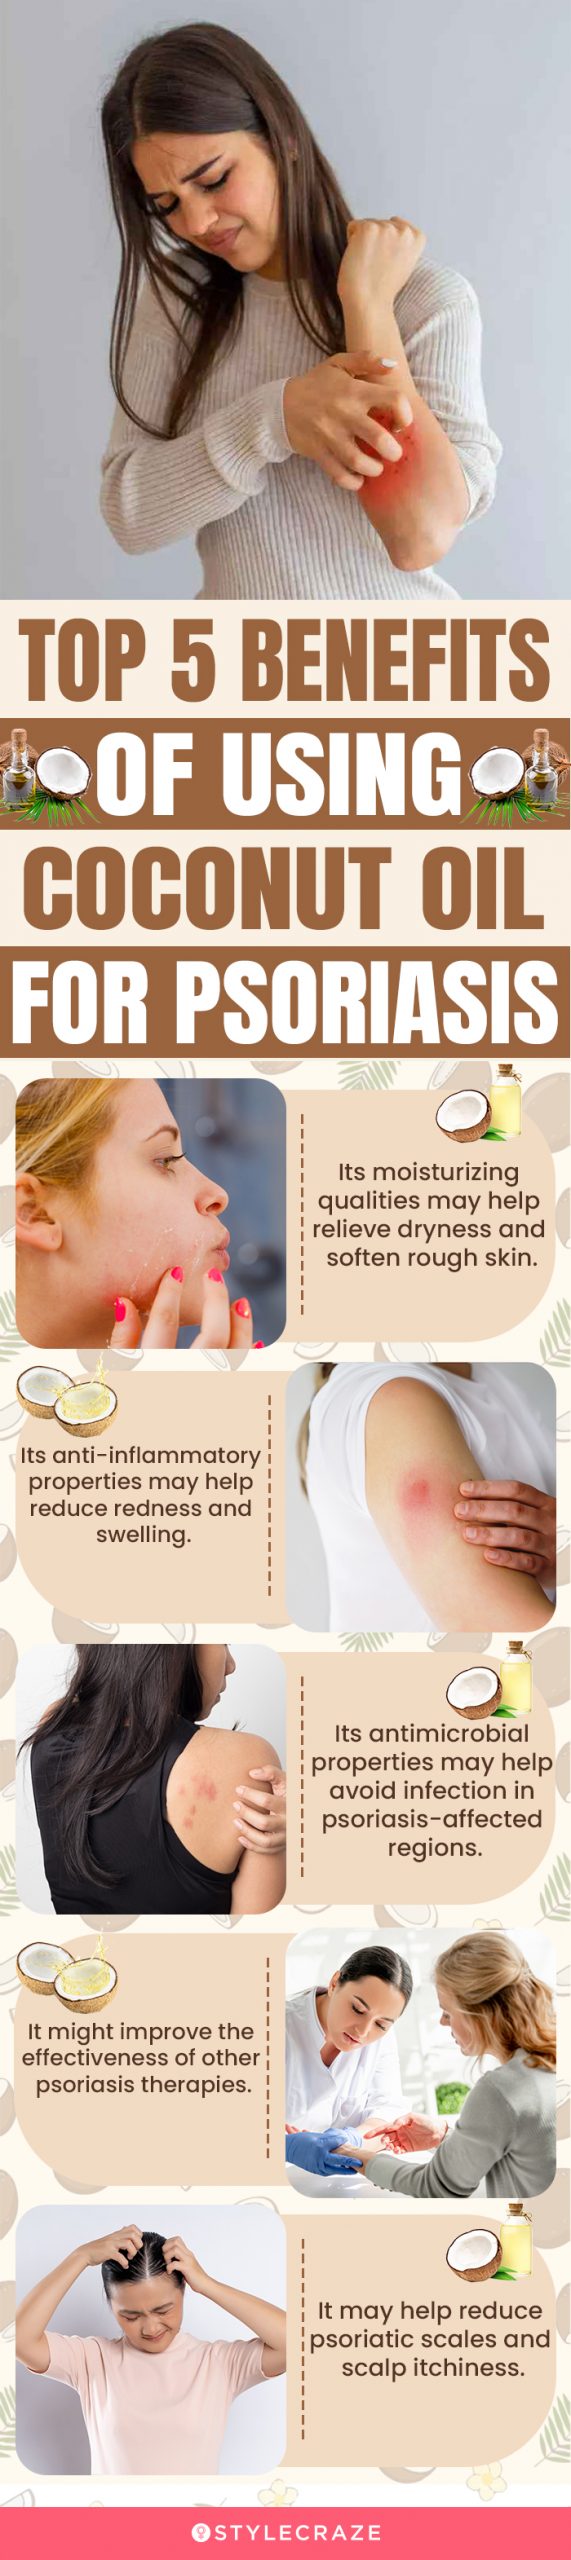 top 5 benefits of using coconut oil for psoriasis (infographic)